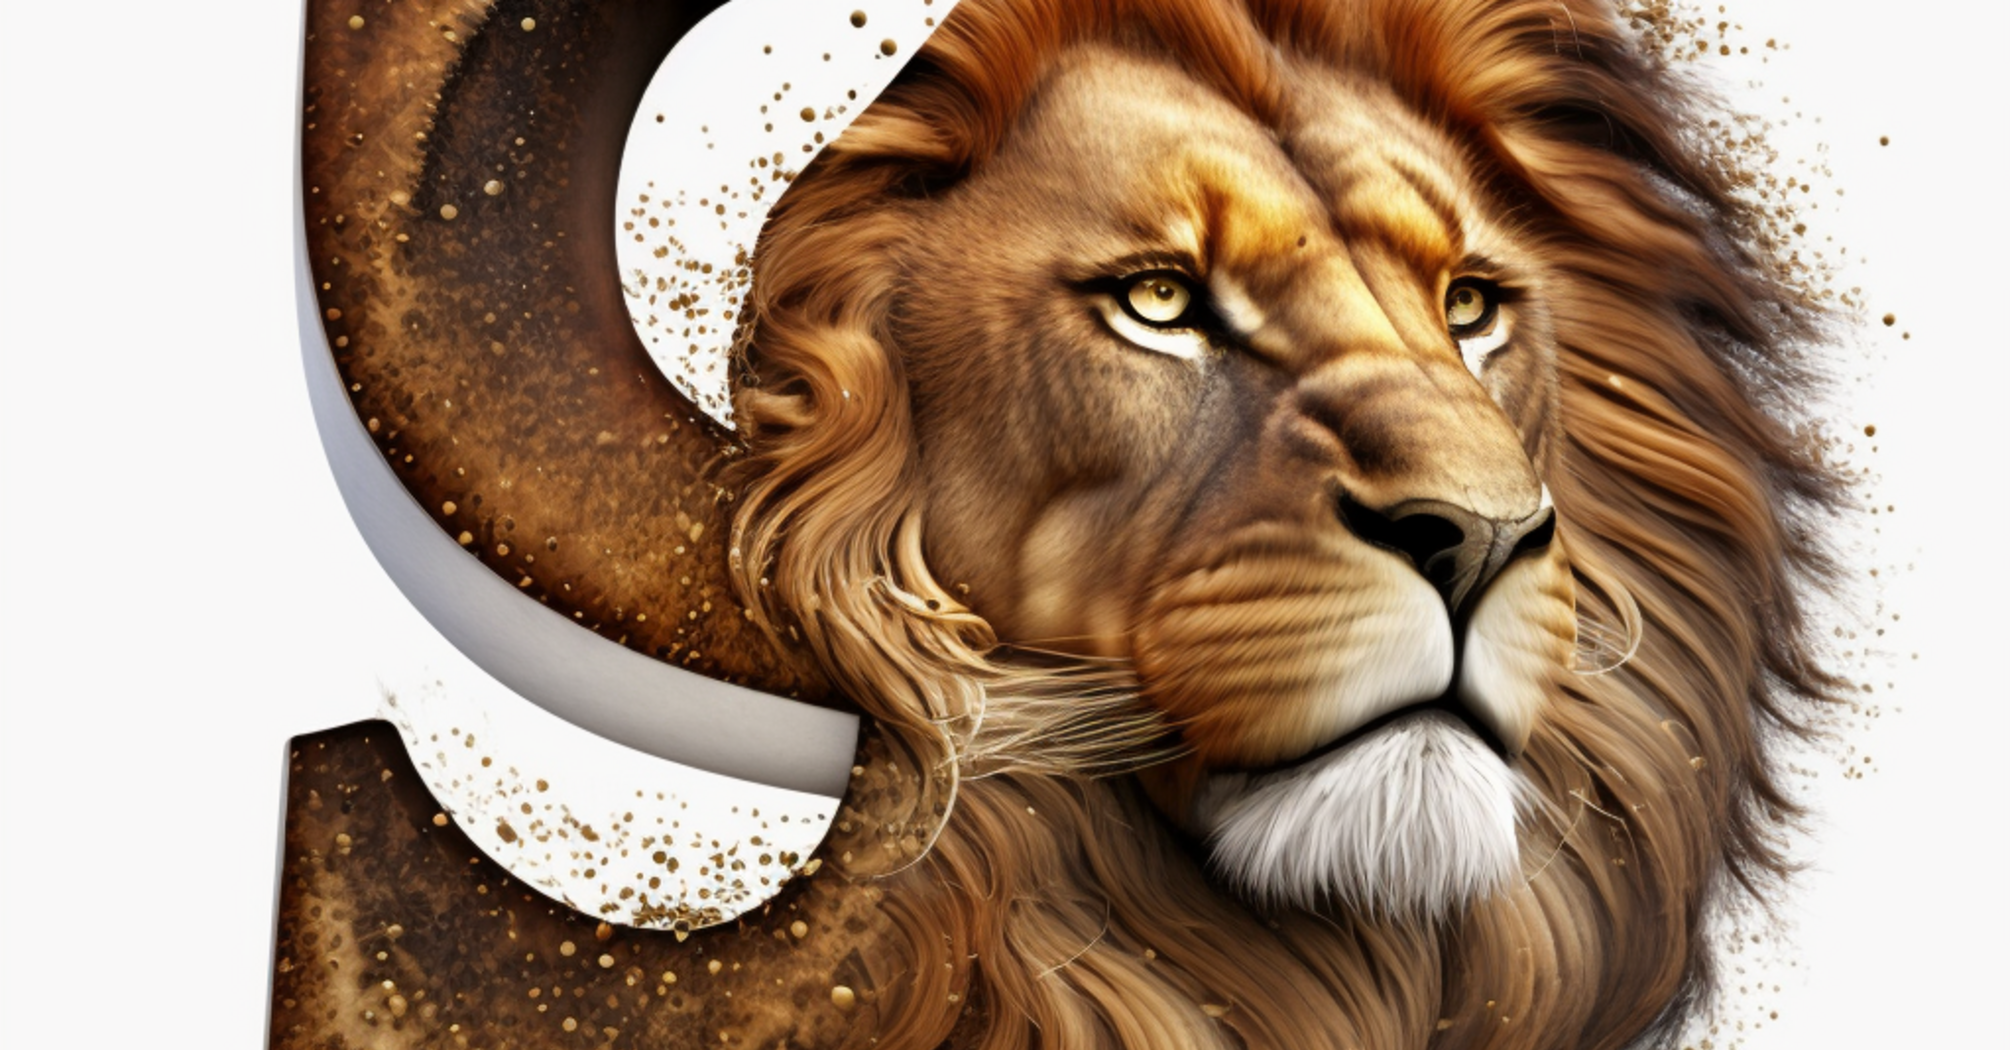 This zodiac sign is expected to have a fulfilling month: horoscope for September